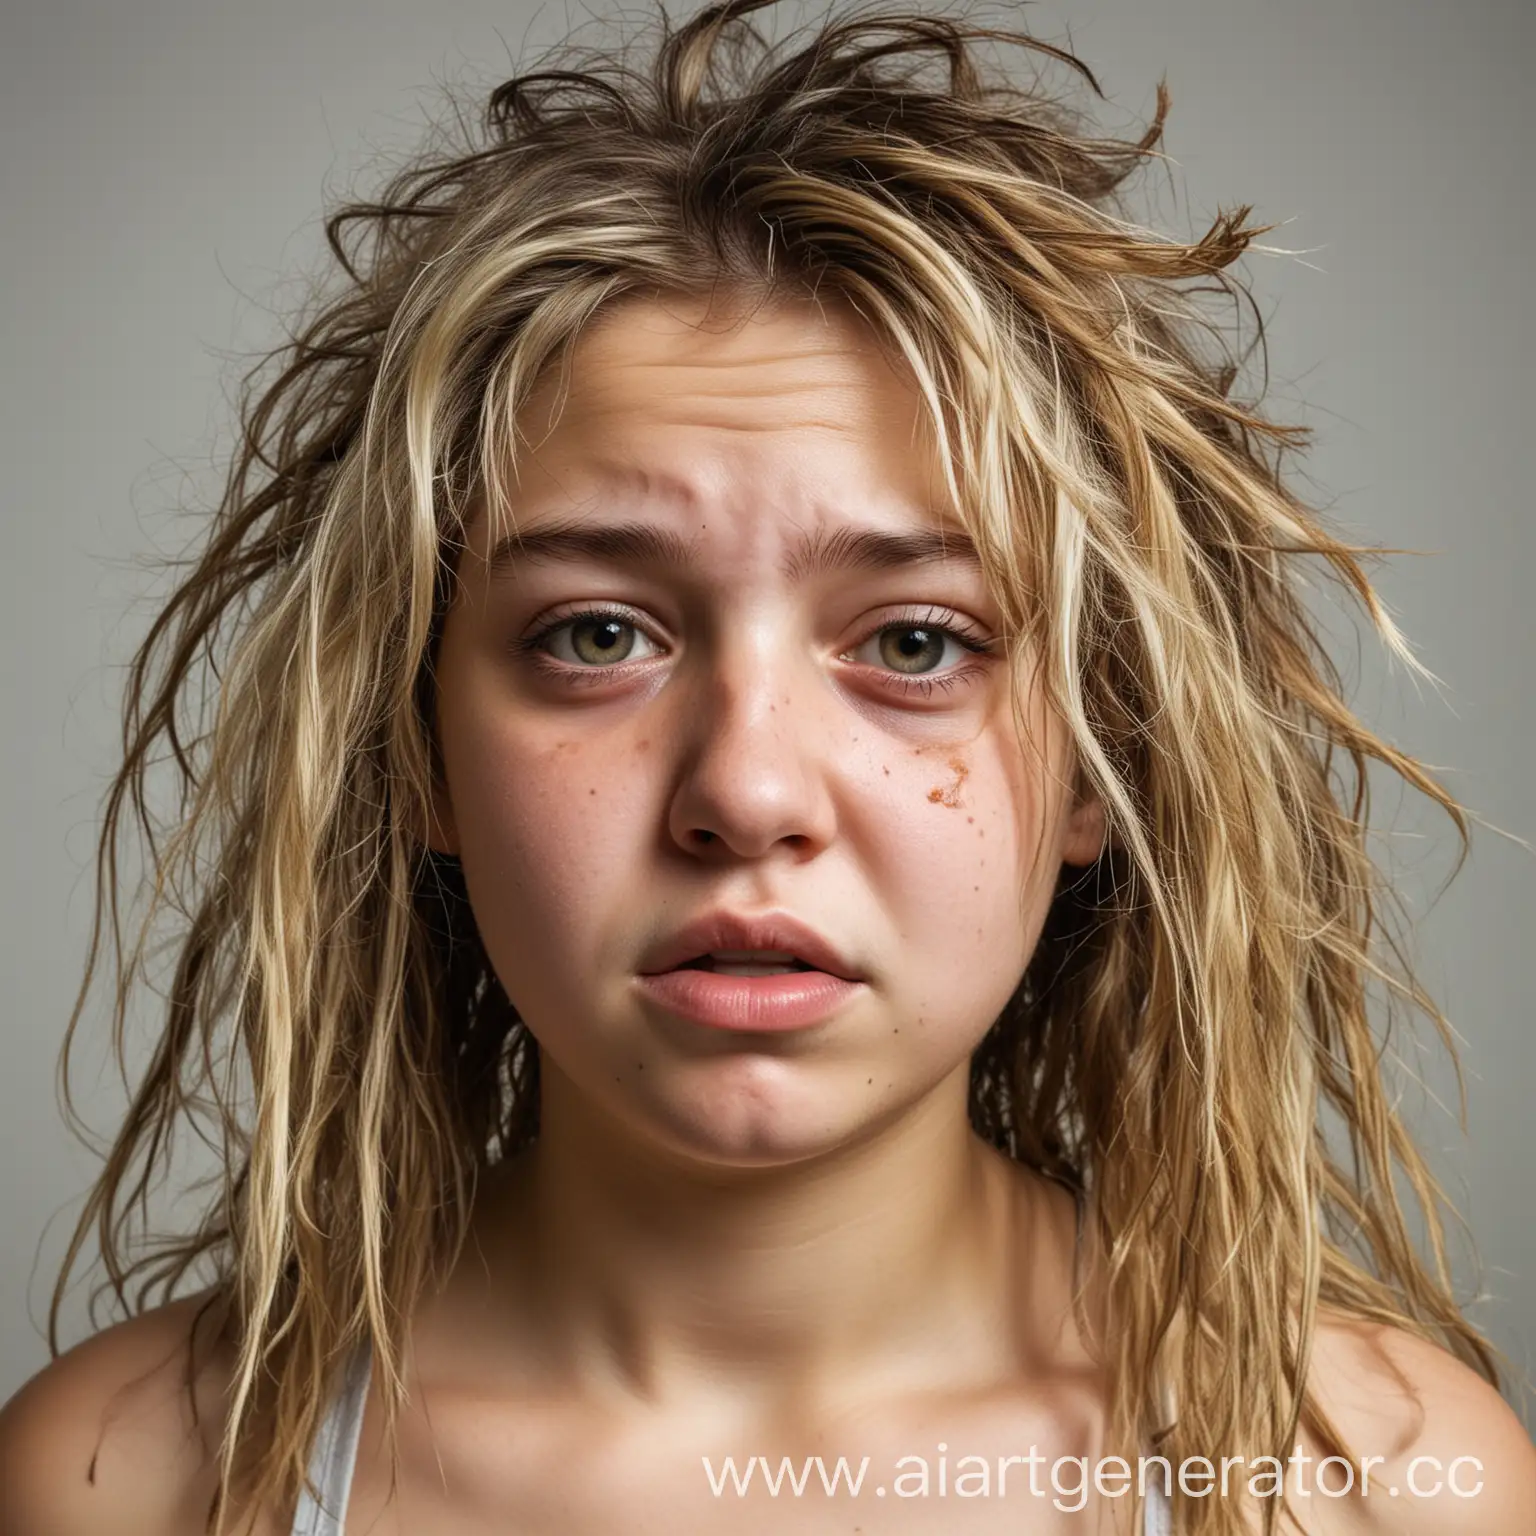 Disheveled-Girl-with-Unnatural-Highlights-and-Aggressive-Expression